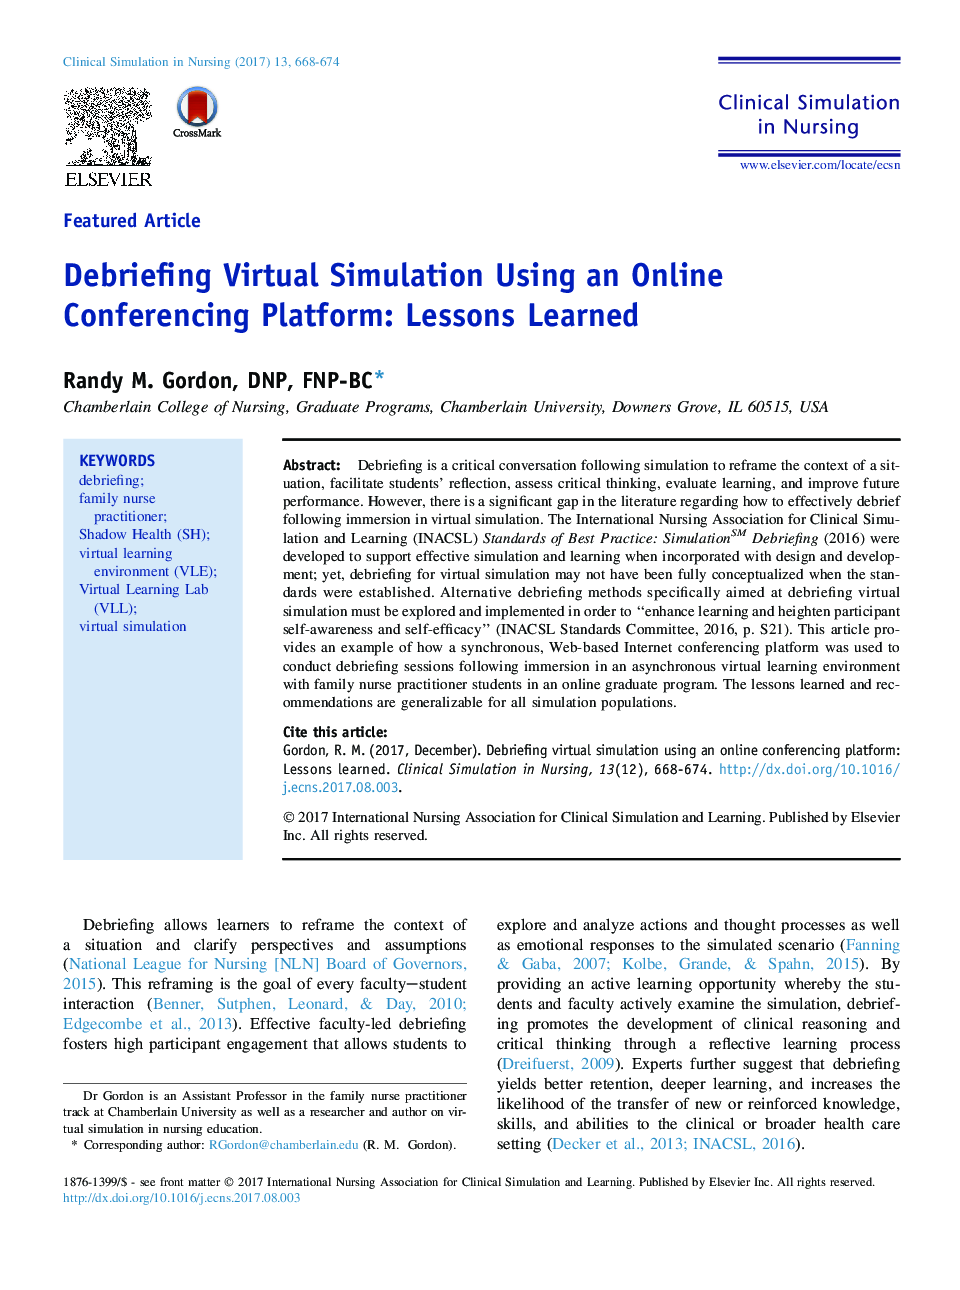 Debriefing Virtual Simulation Using an Online Conferencing Platform: Lessons Learned